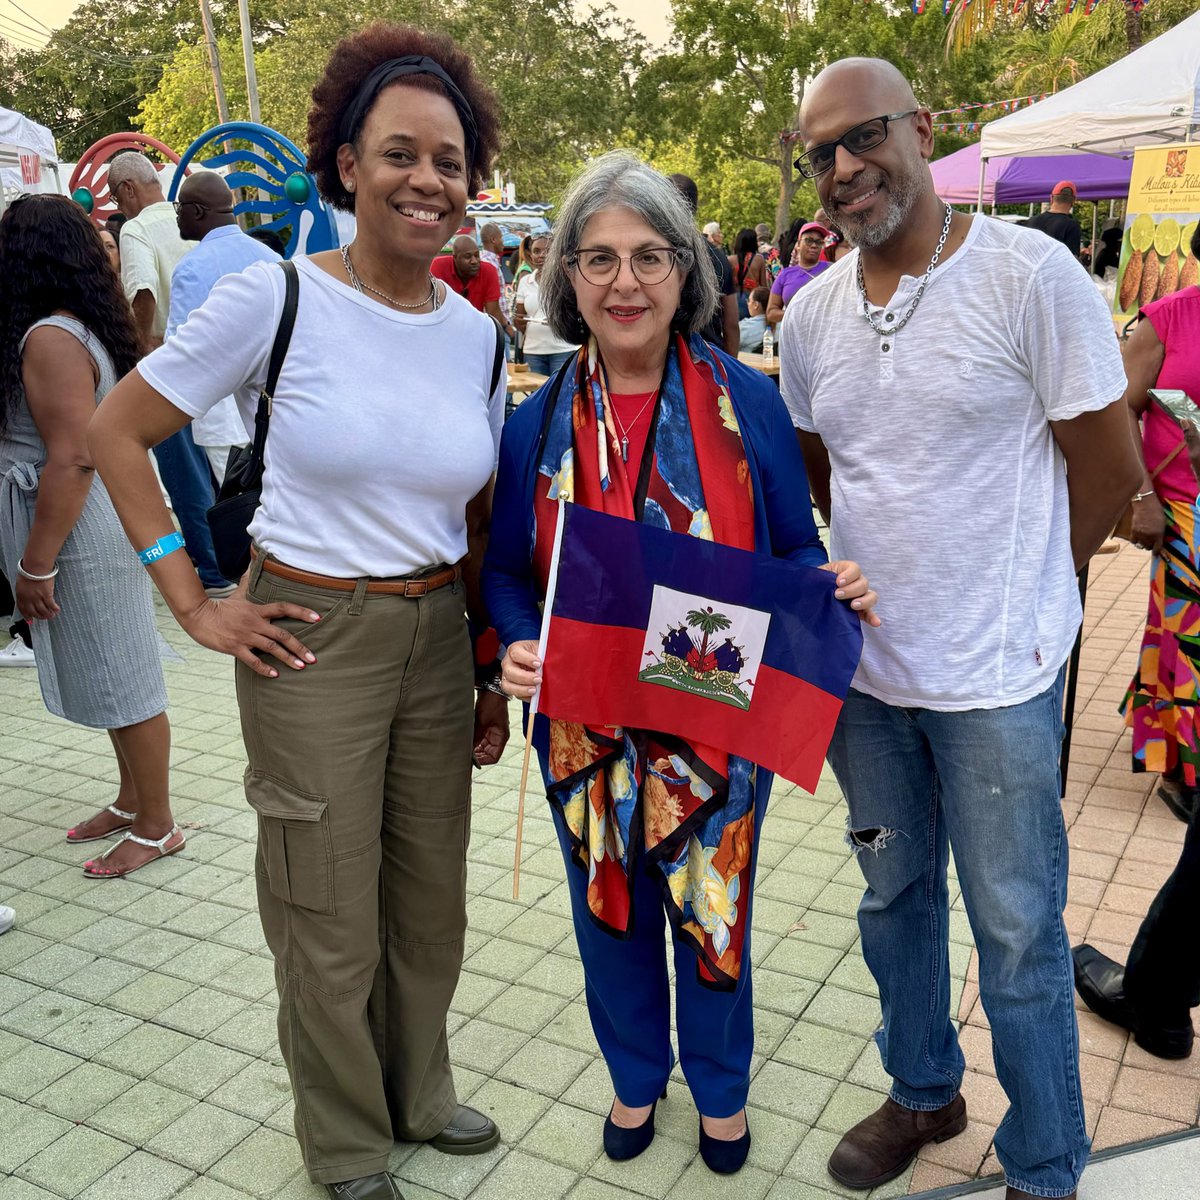 🇭🇹 Today we celebrate Haitian Flag Day! Let's honor the rich culture and resilient spirit of Haiti and our Haitian community in Miami-Dade. Here's to the incredible contributions of the Haitian diaspora.